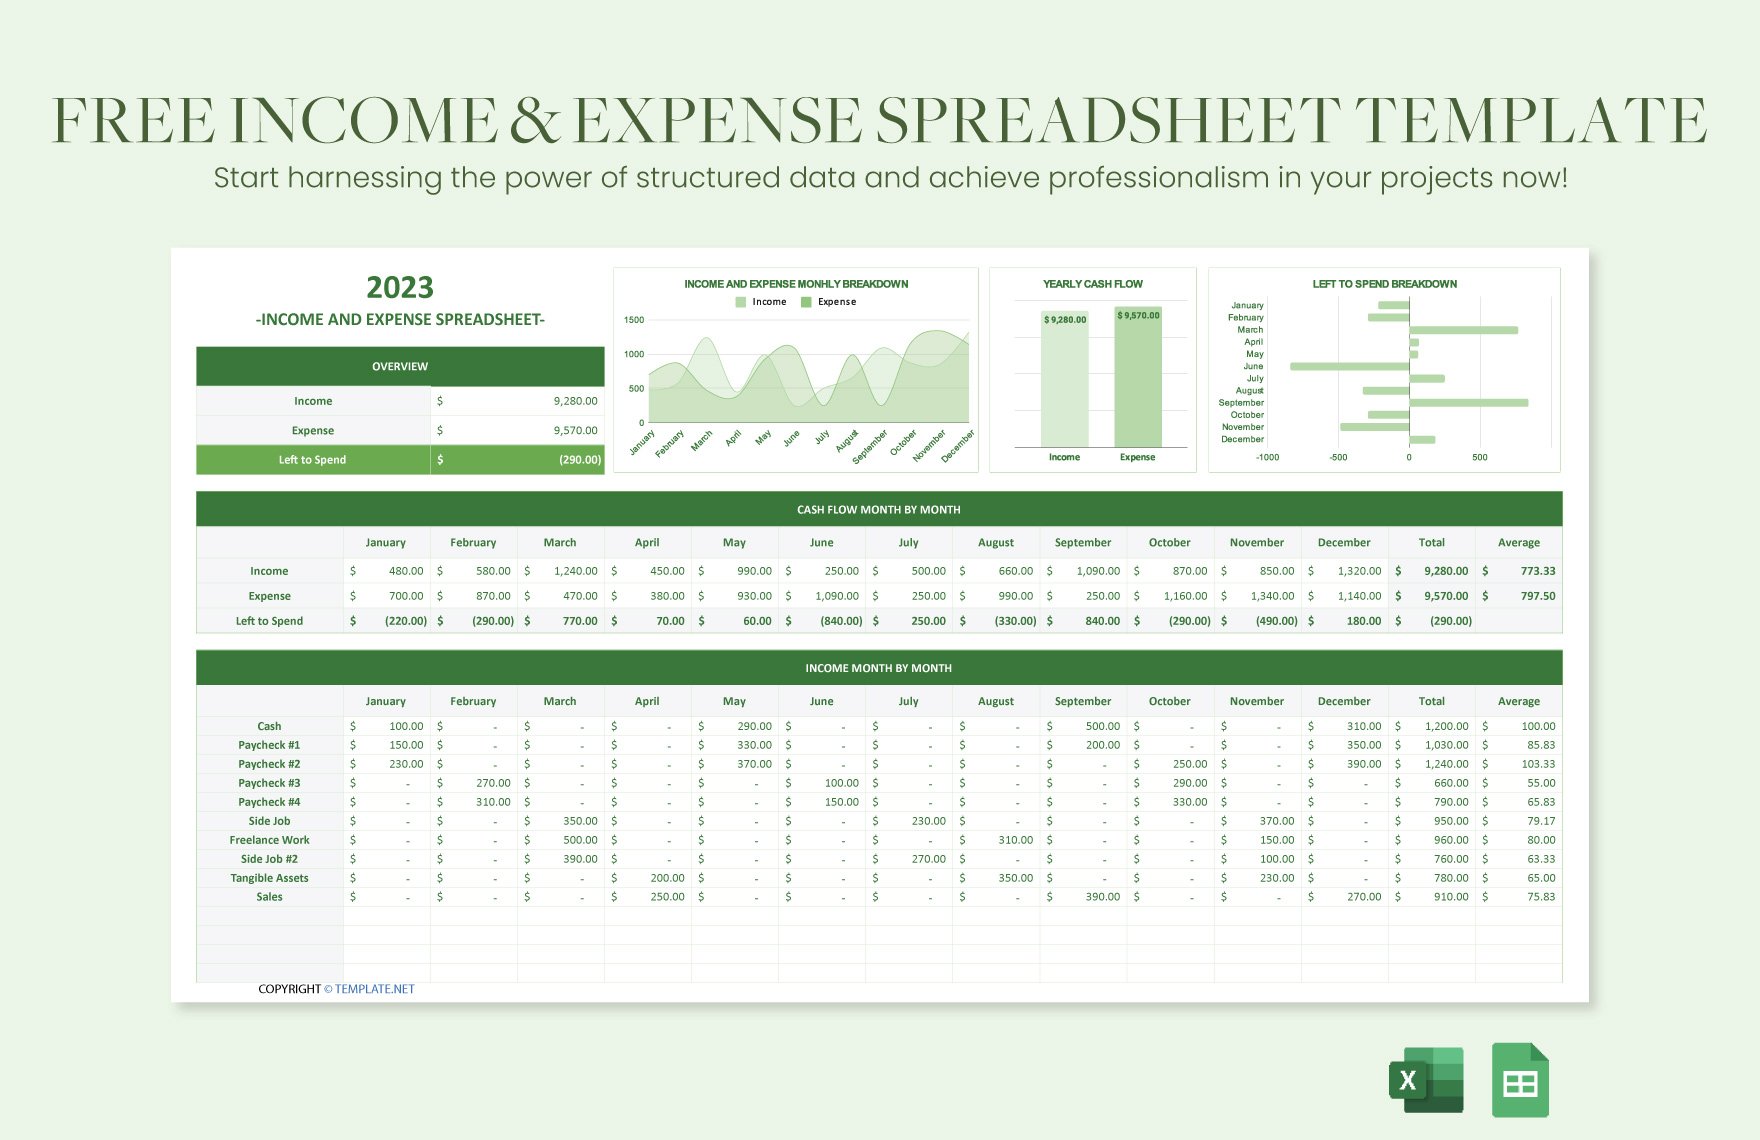 Free Income & Expense Spreadsheet in Excel, Google Sheets